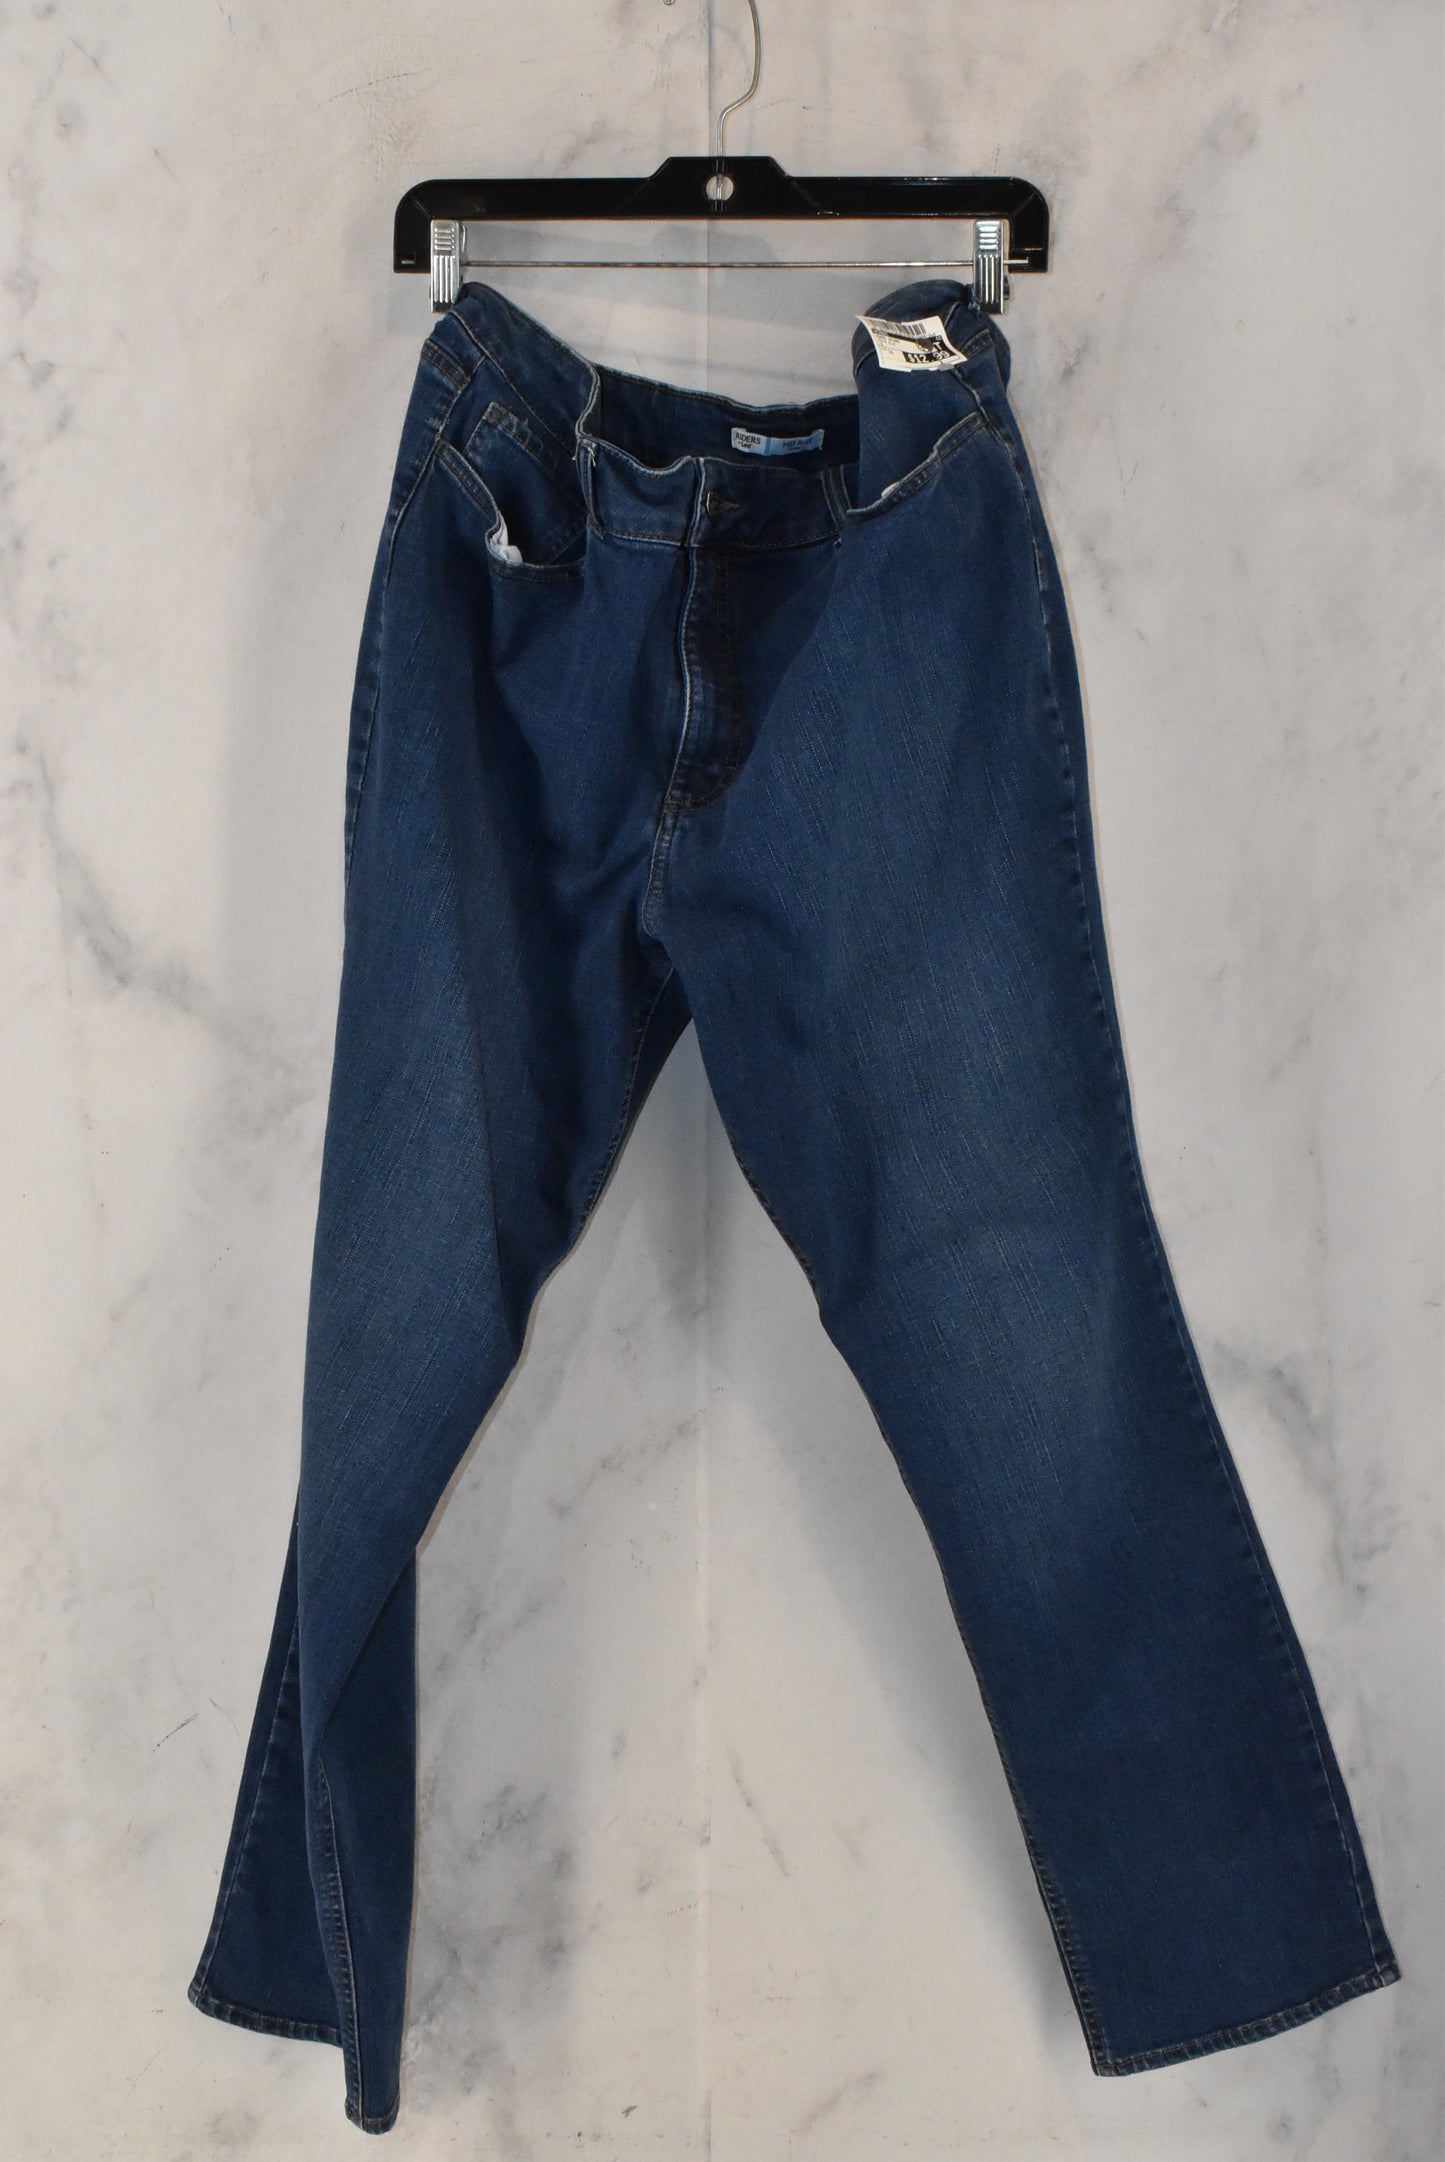 Jeans Skinny By Riders  Size: 18